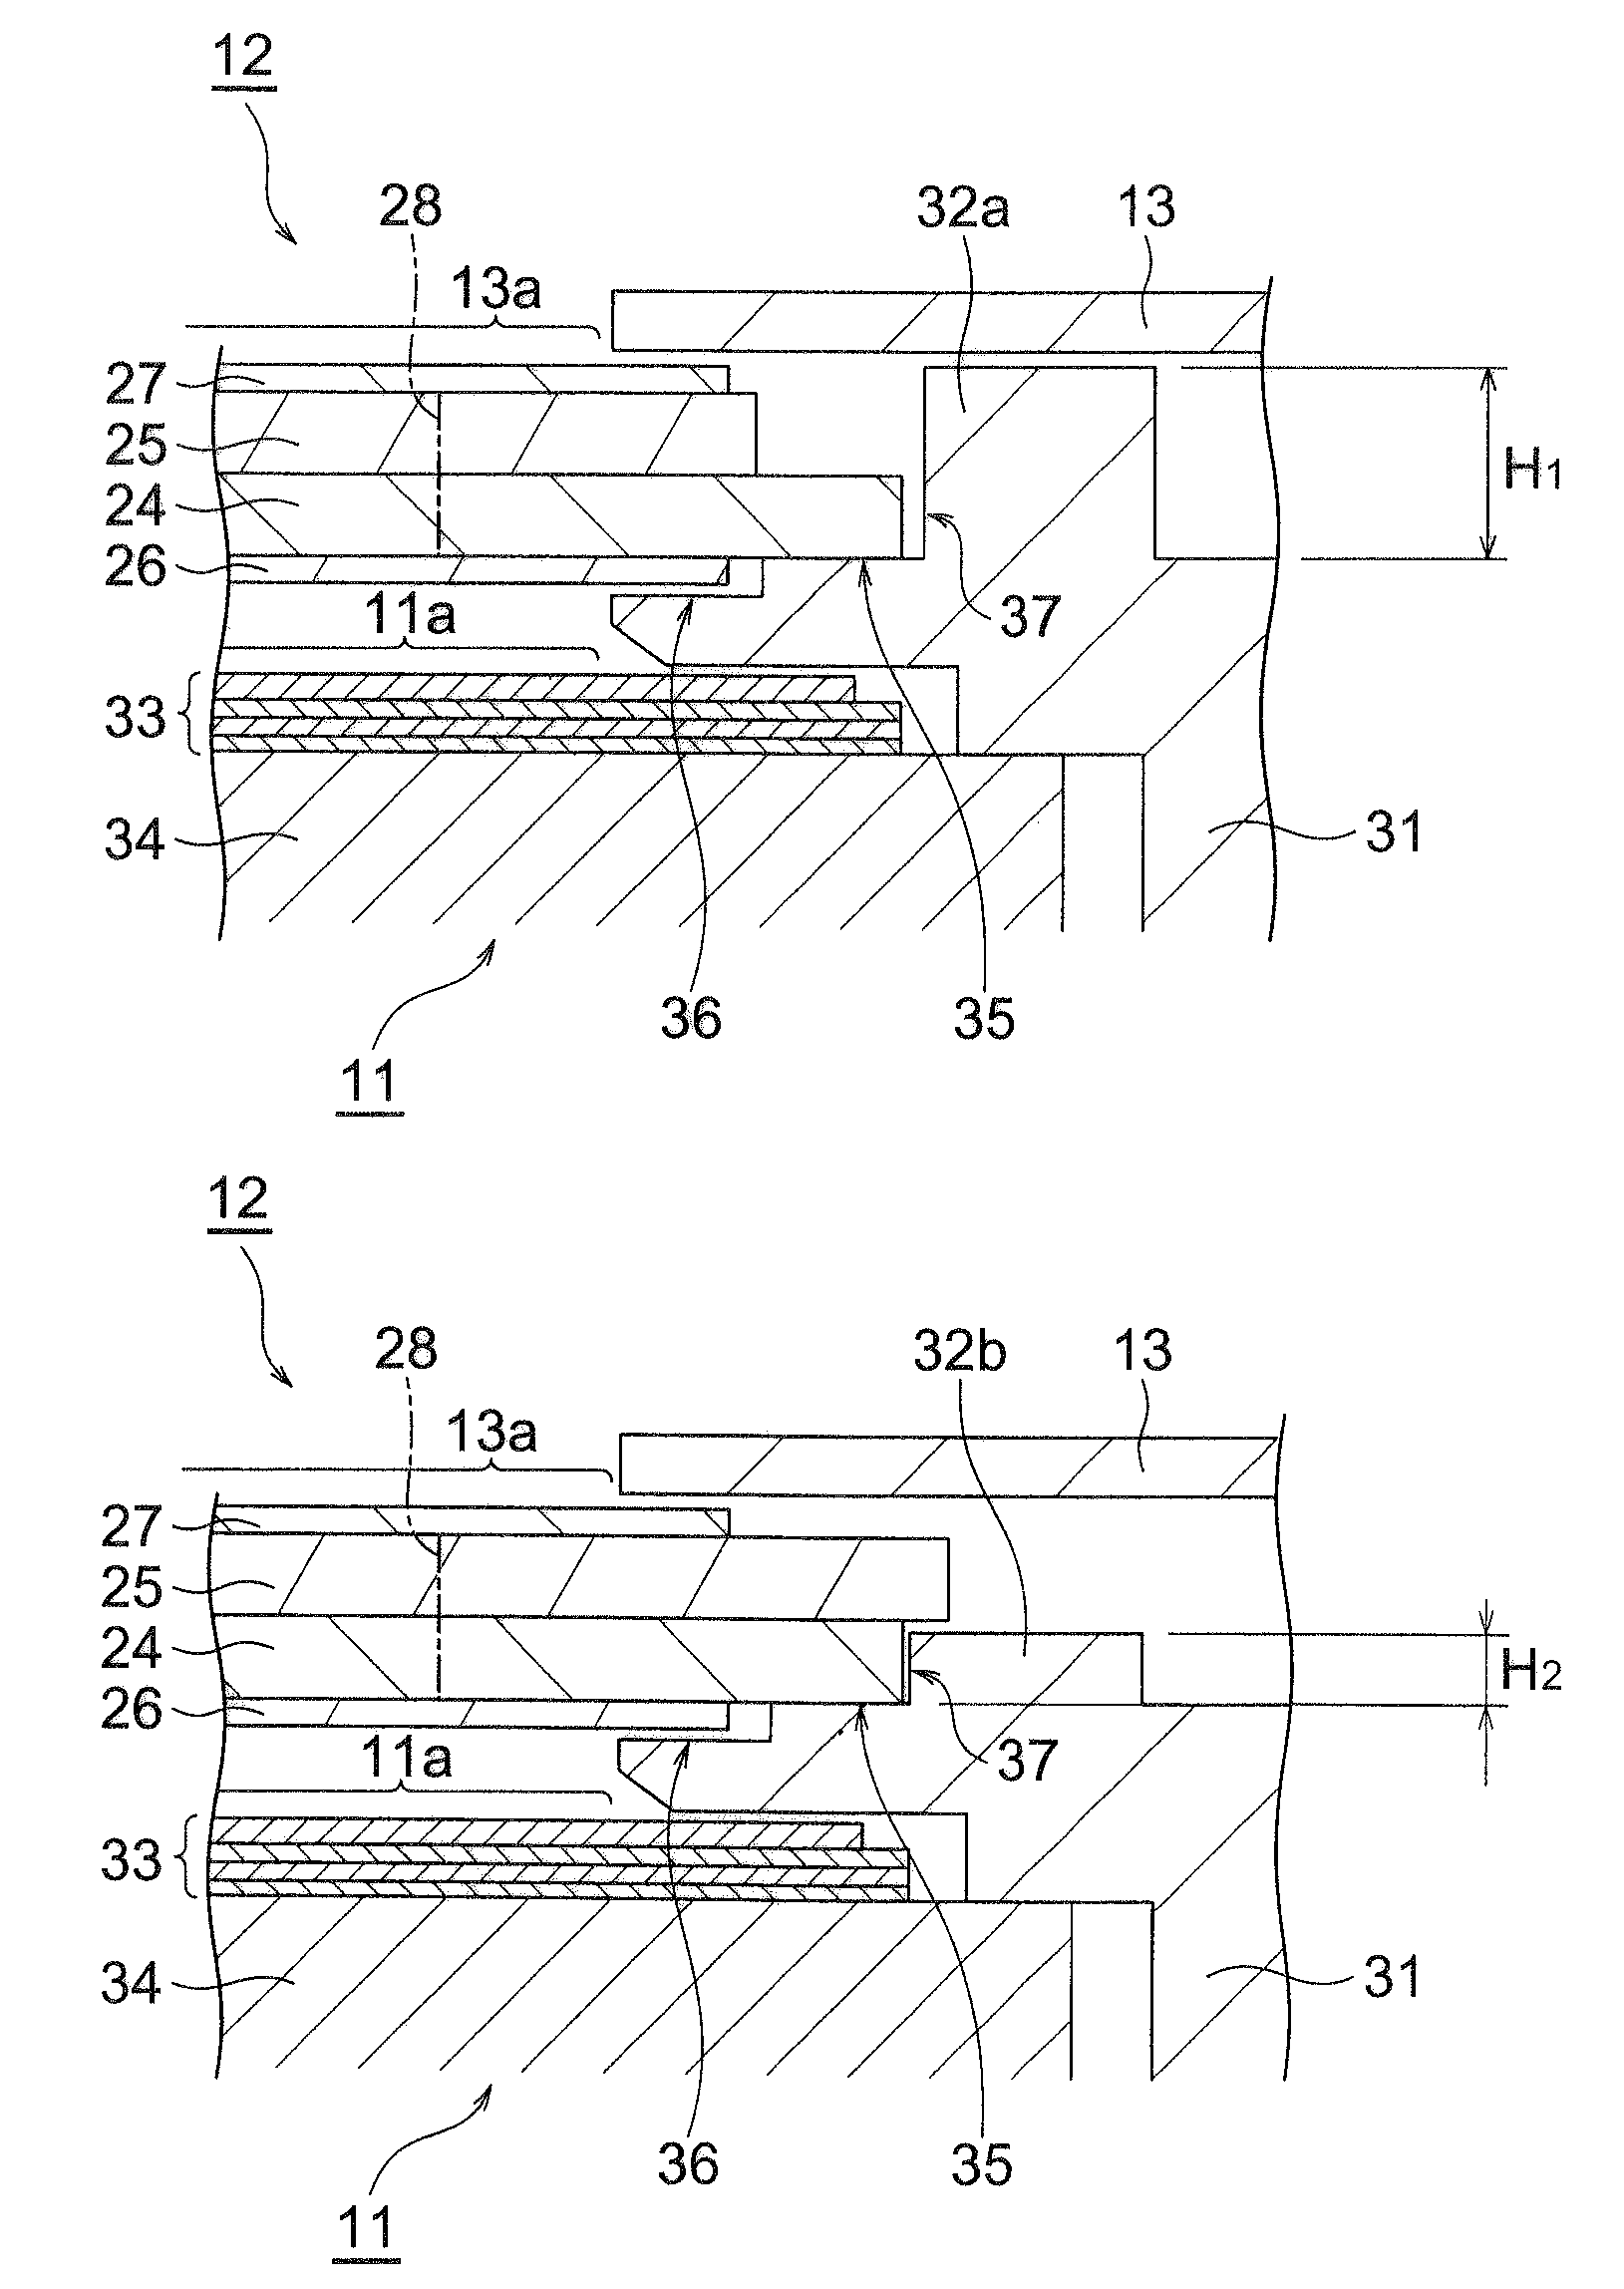 Display device comprising a first positioning wall having a height larger than the height of the bonding surface of the substrates and a second positioning wall having a height smaller than the height of the bonding surface